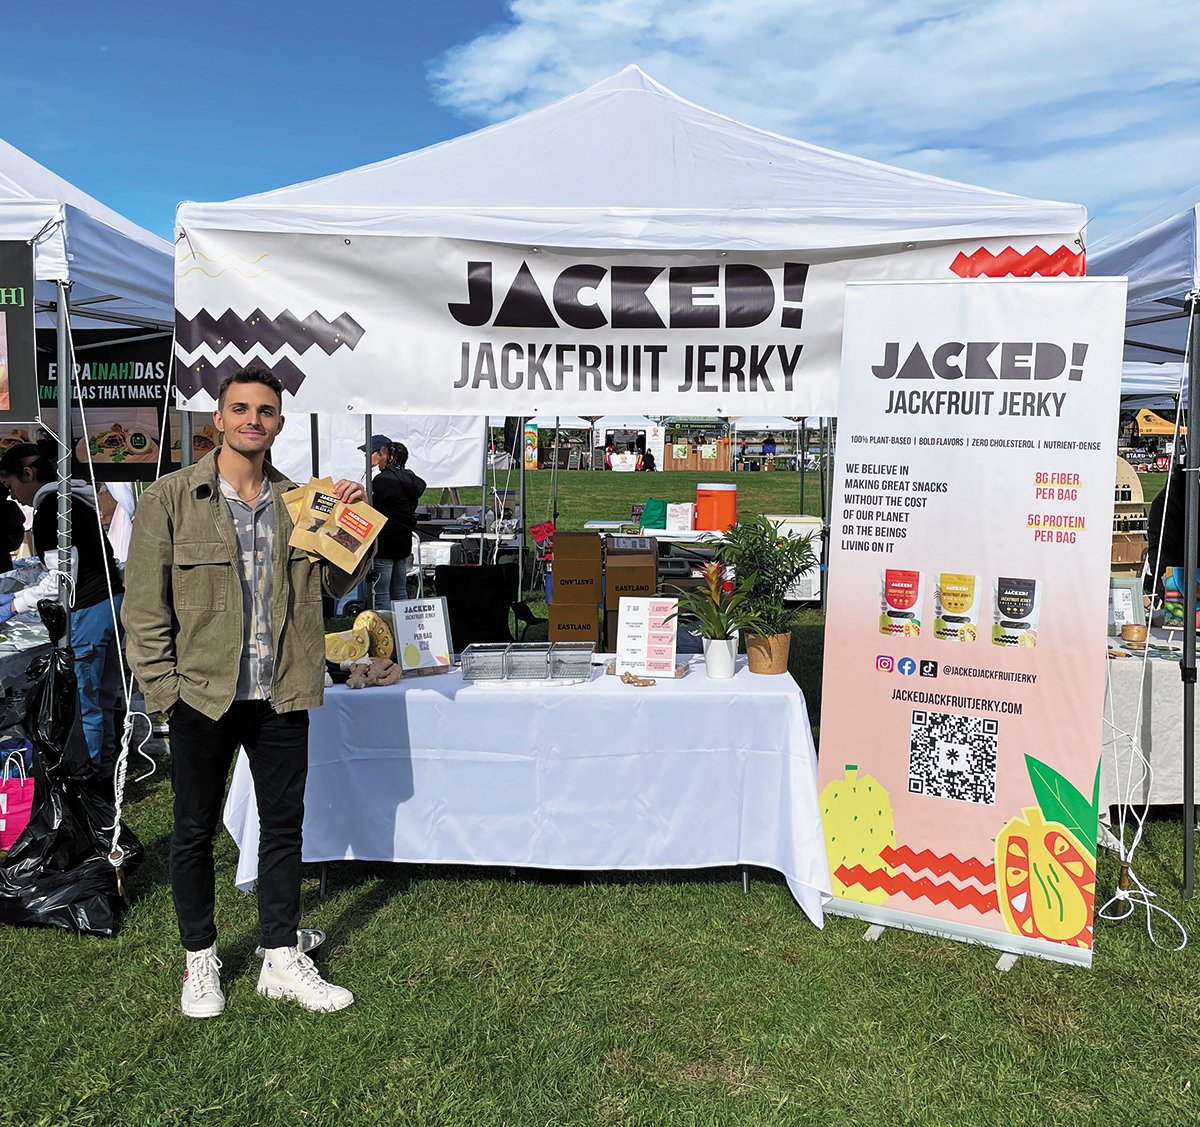 Student from da Vinci Center's Master of Product Innovation program selling their Jackfruit Jerky at an event.